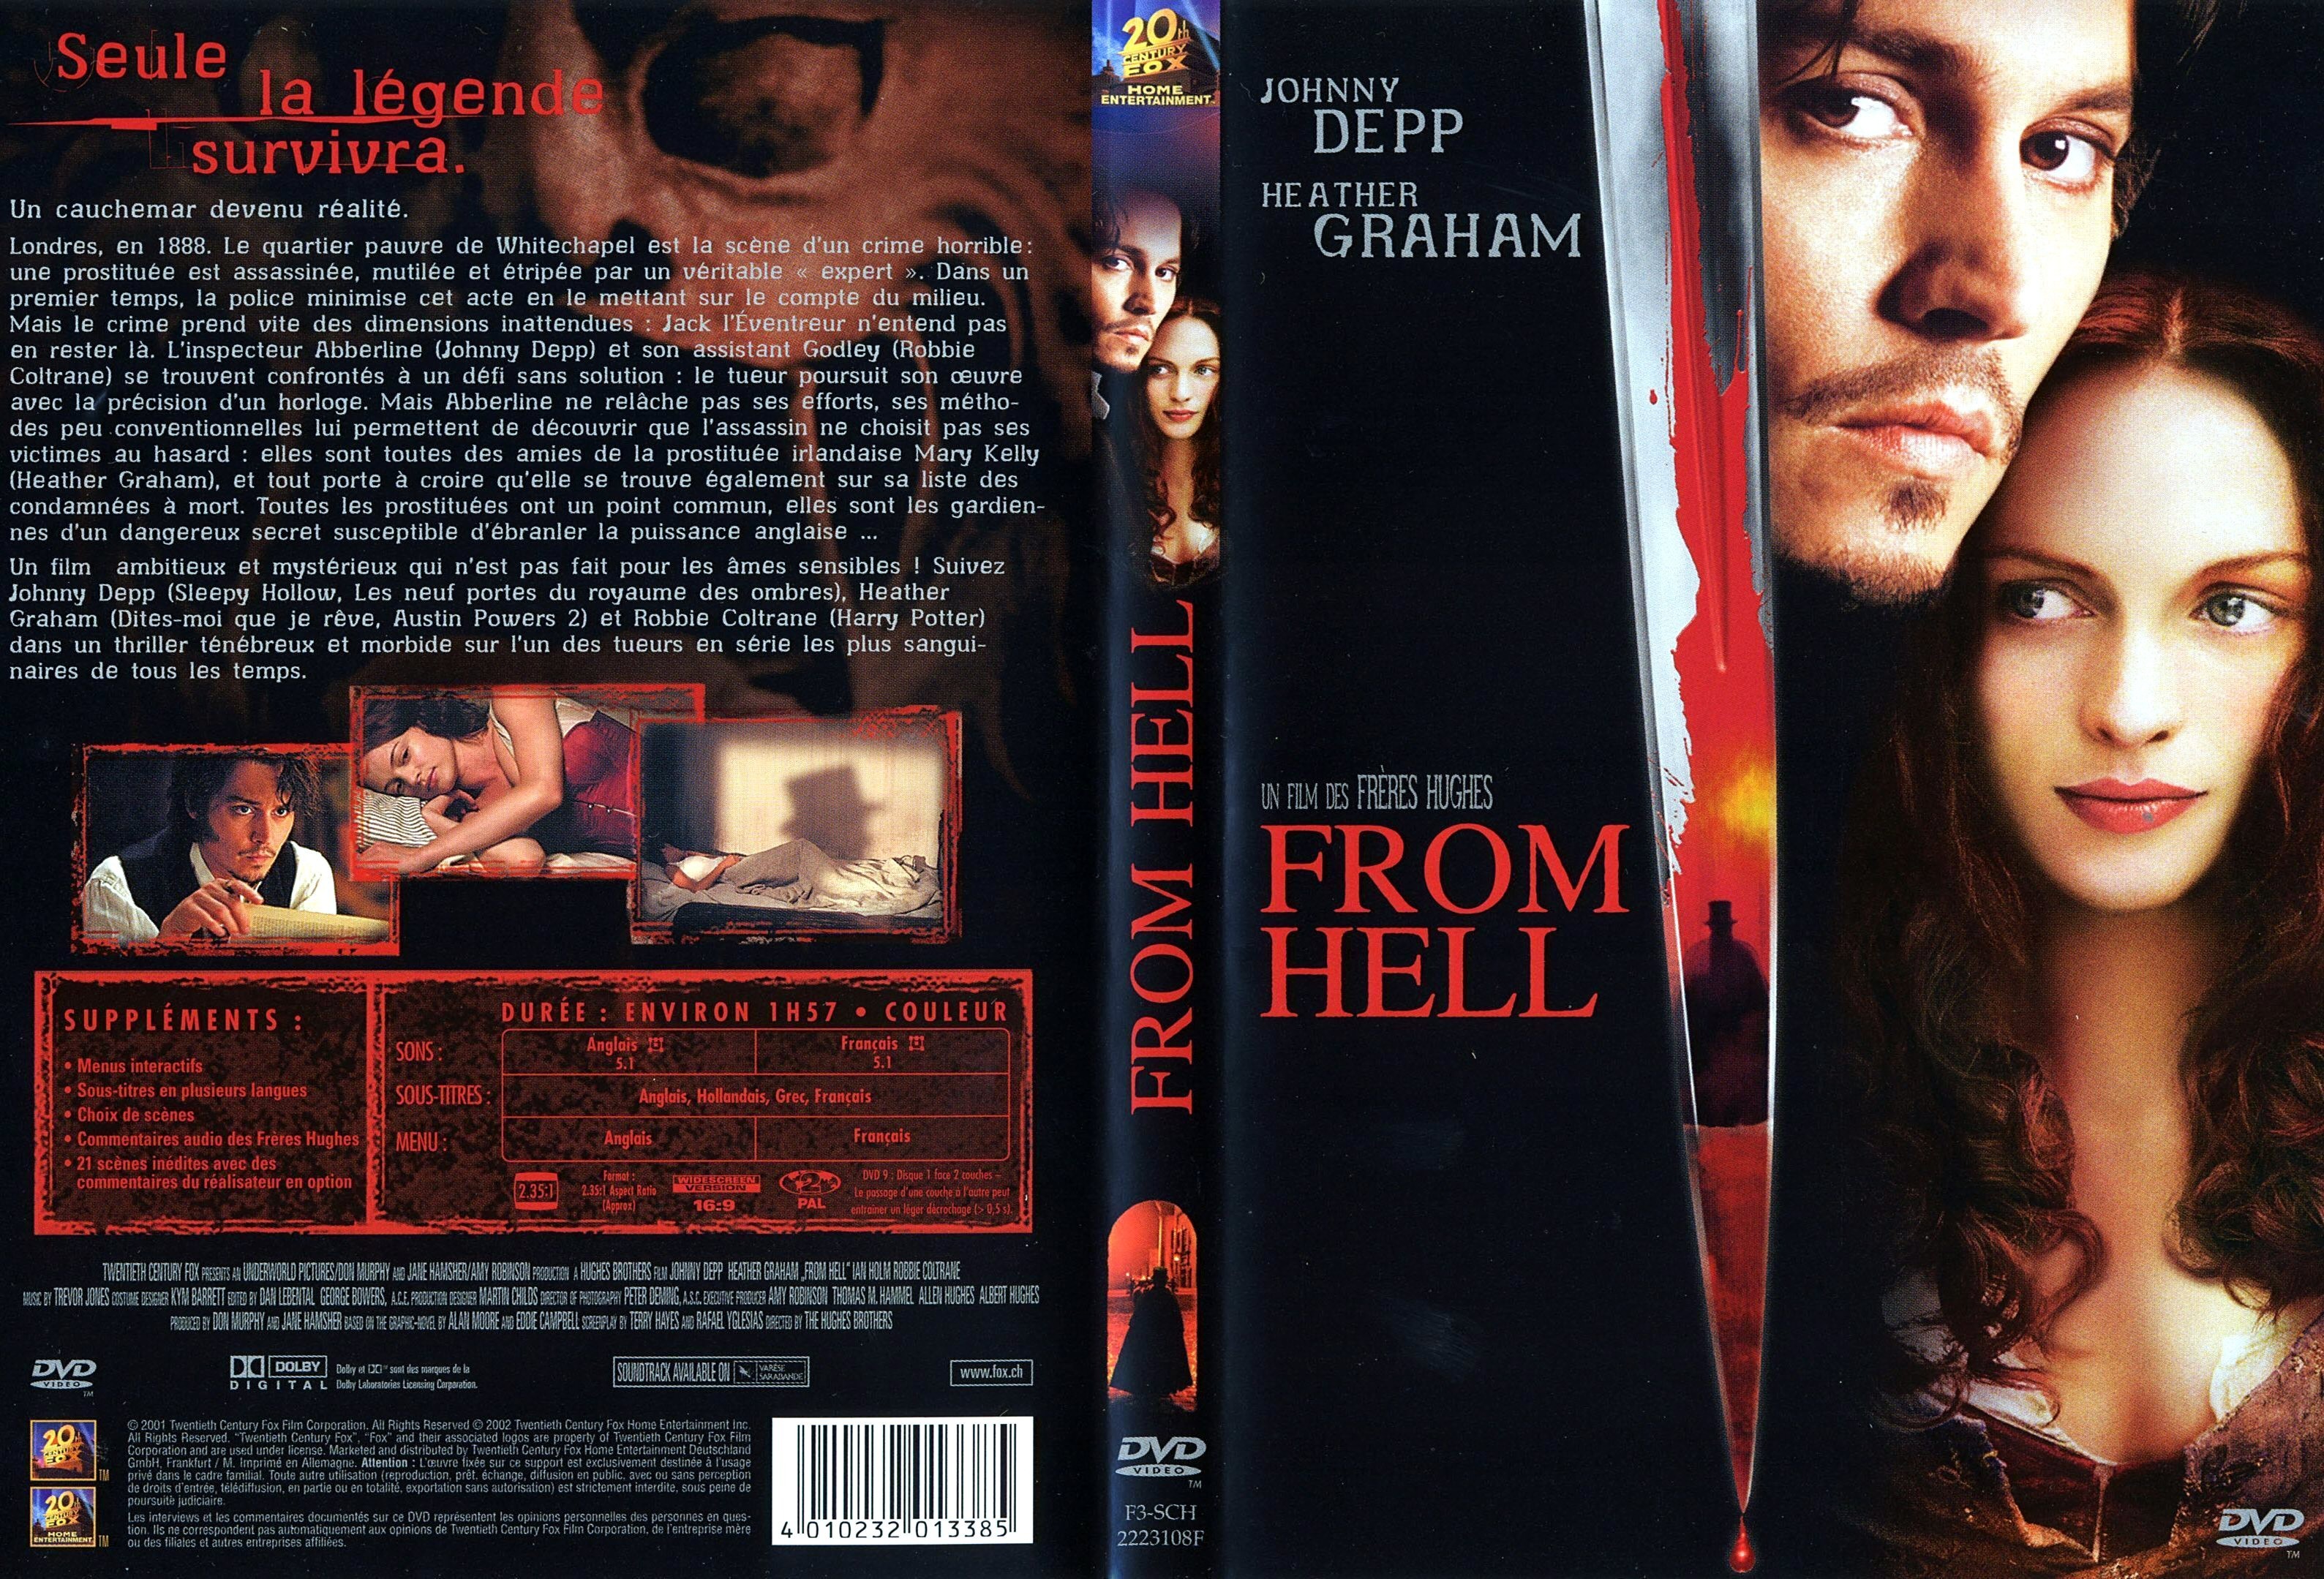 Jaquette DVD From hell